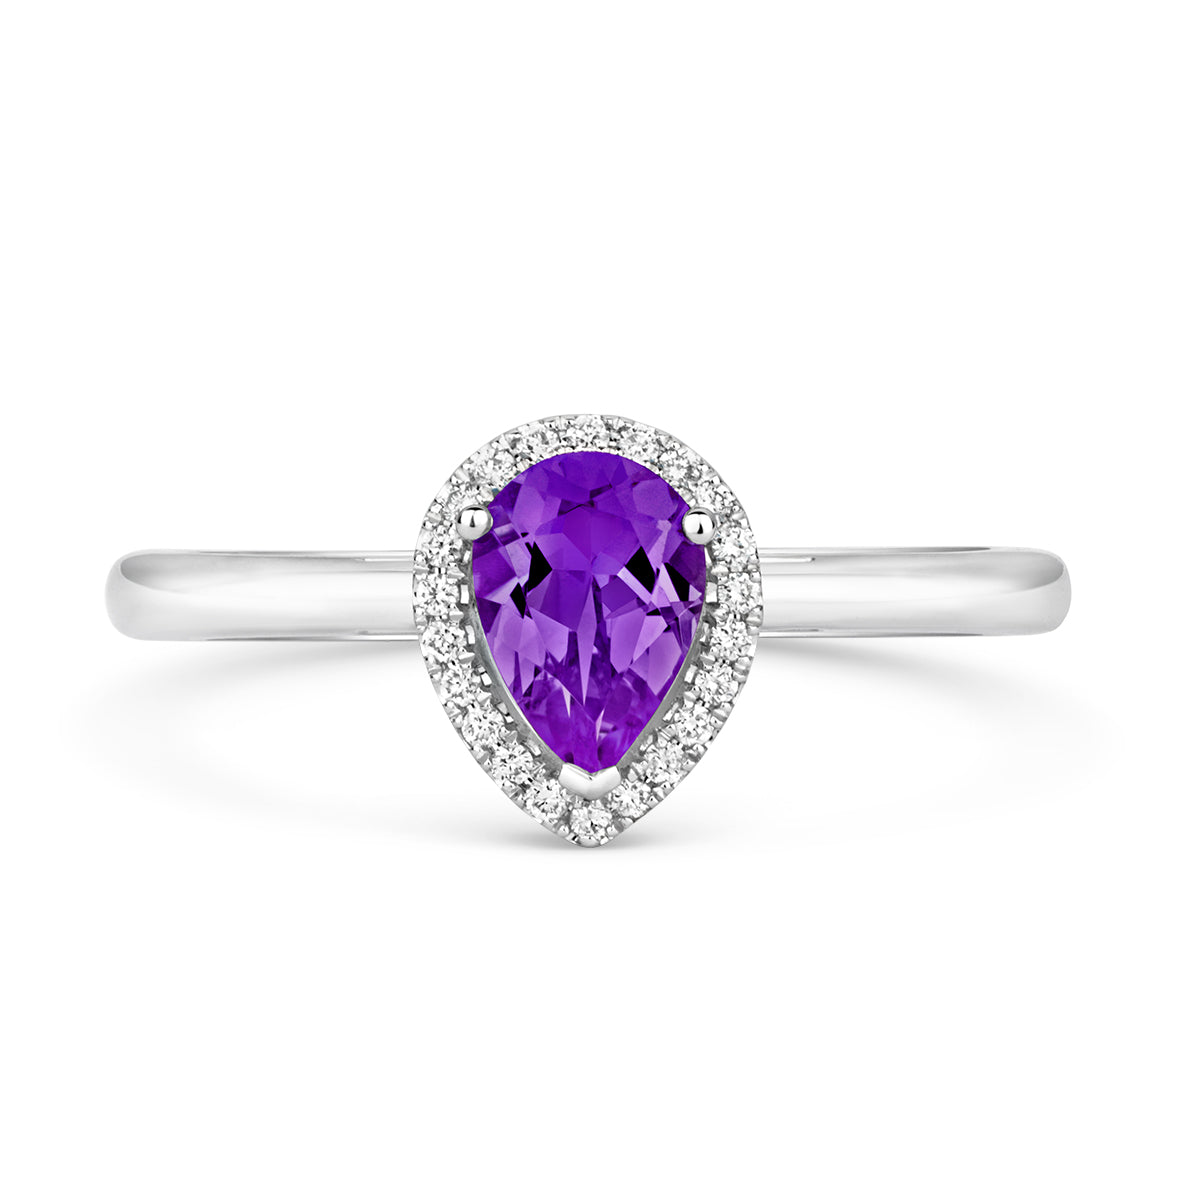 18ct White Gold Pear Cut Amethyst and Diamond Ring